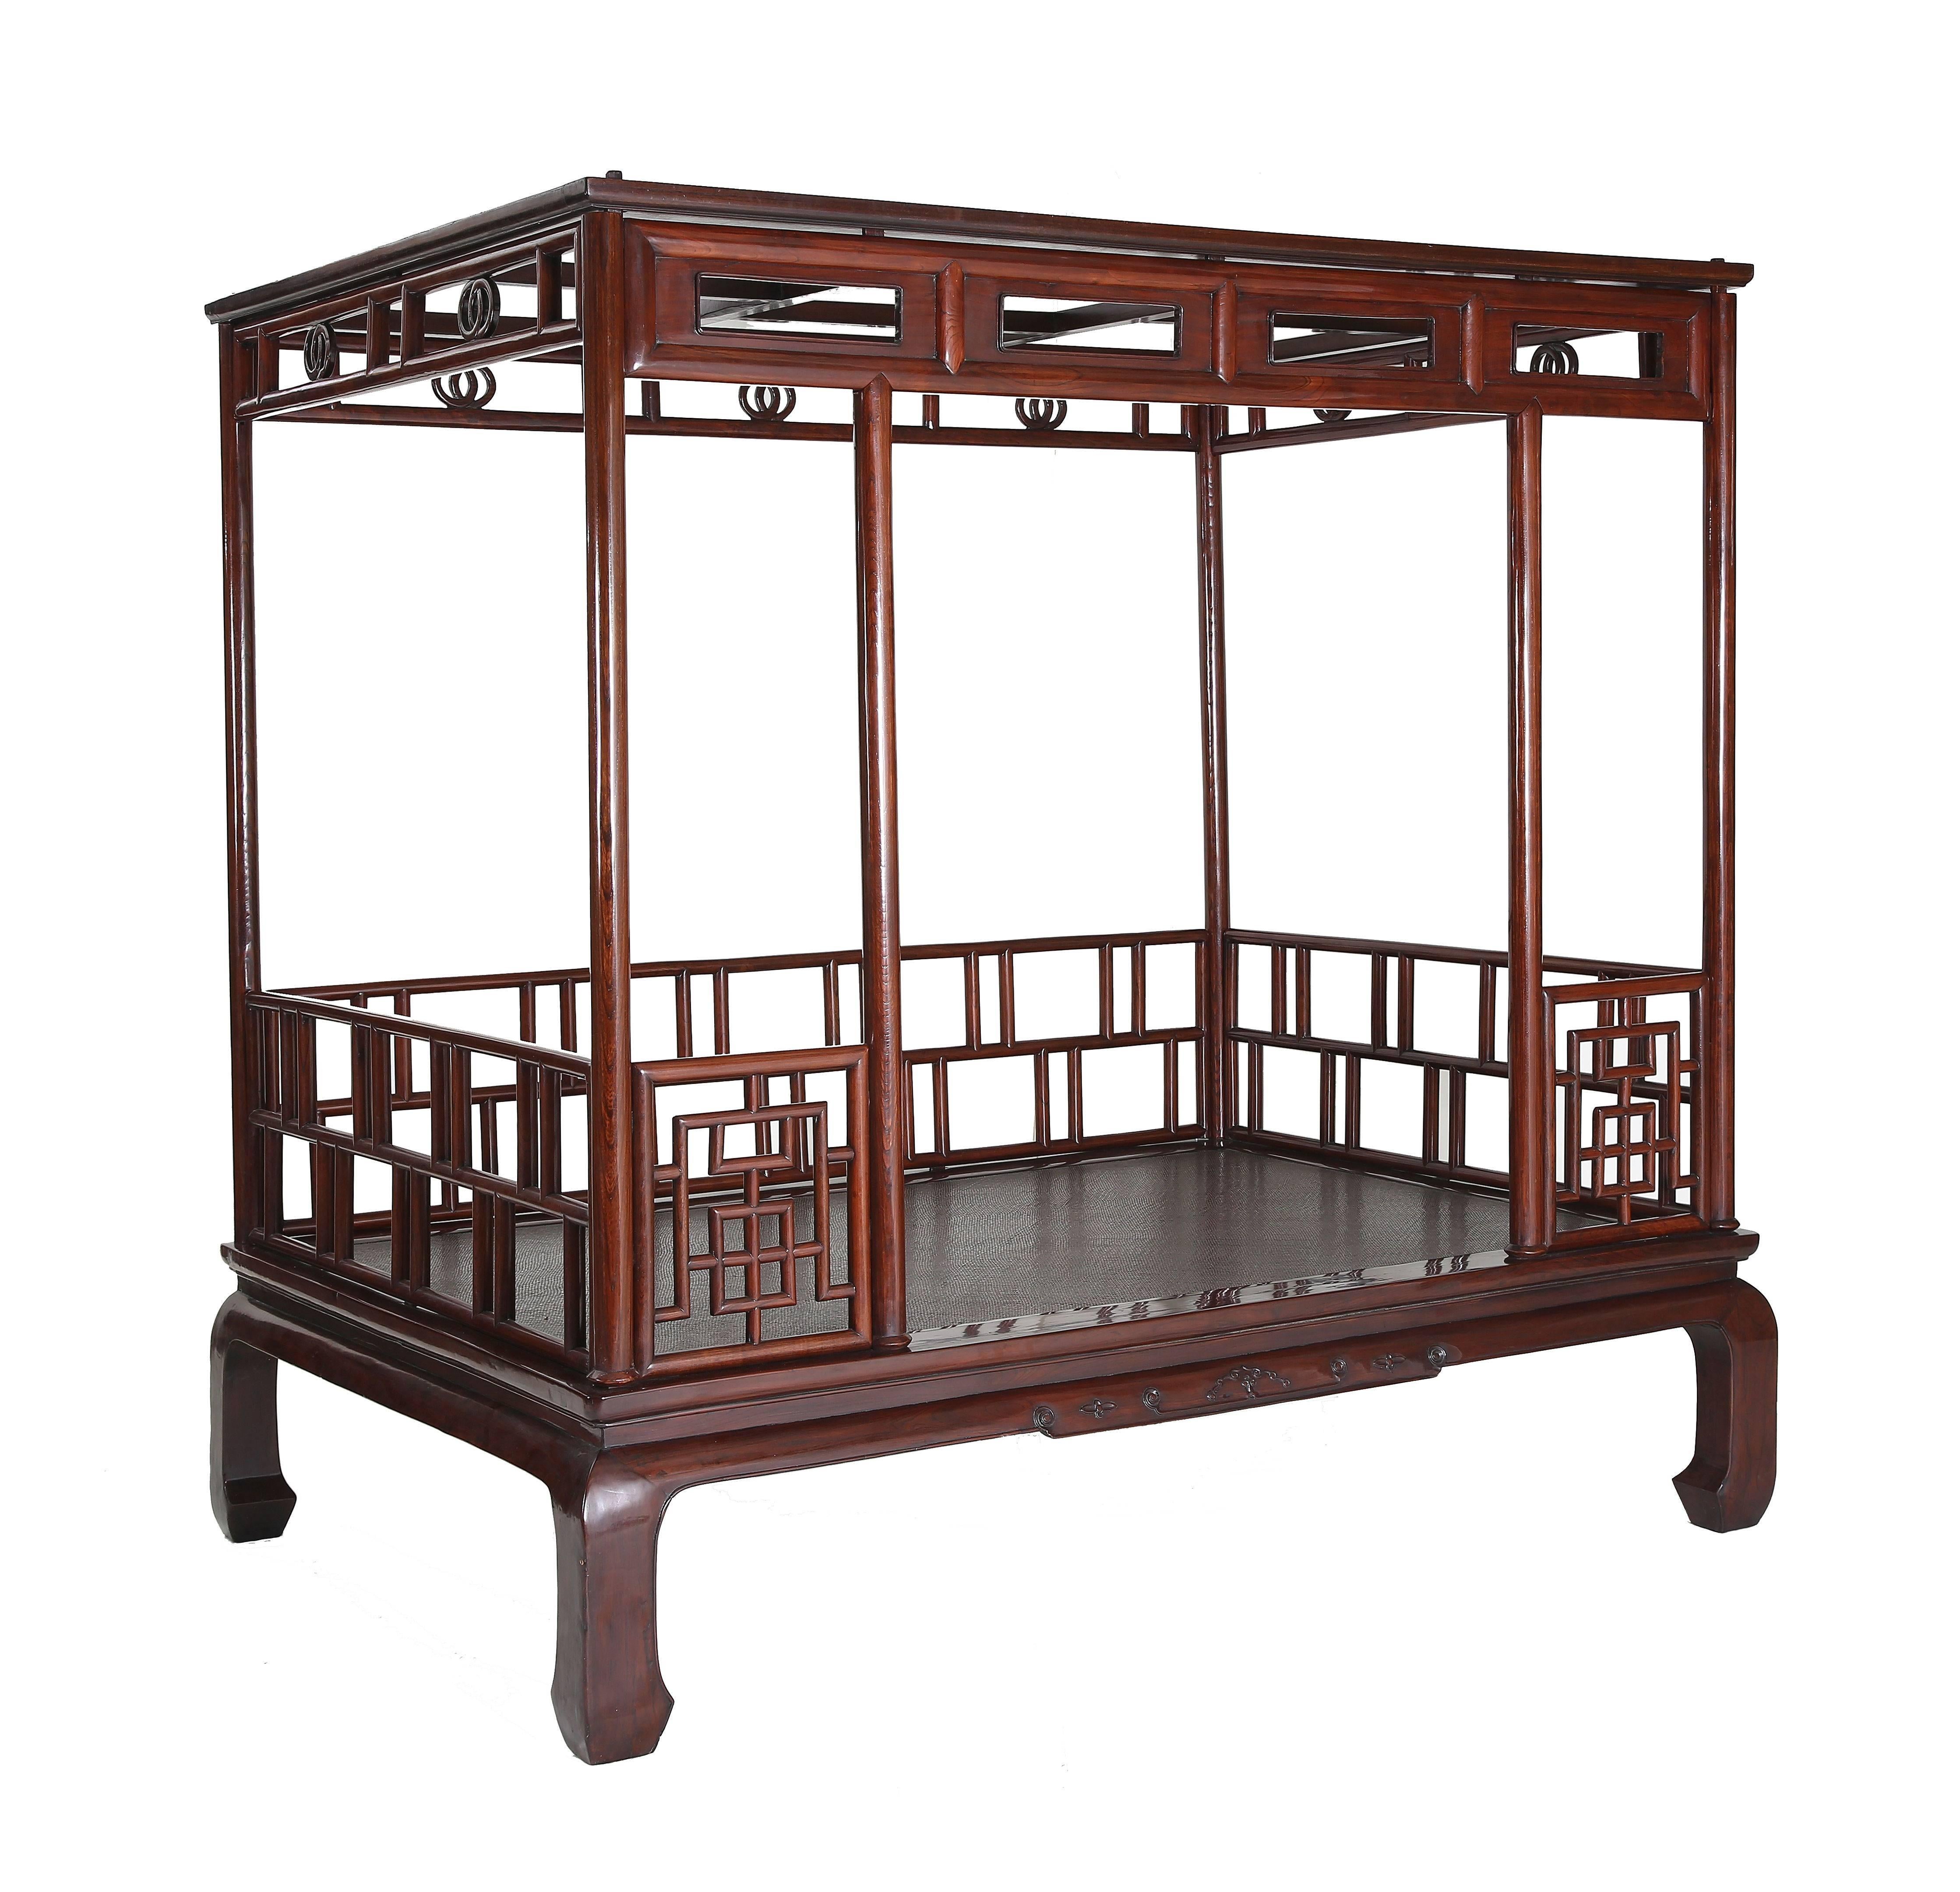 The bed base with a waist, ice-plate edged frame enclosing a cane top, slightly convex aprons with relief-carving and beading continuing to the horse hoof feet, six posts forming the frame for the railings and canopy, decorated with fretwork of